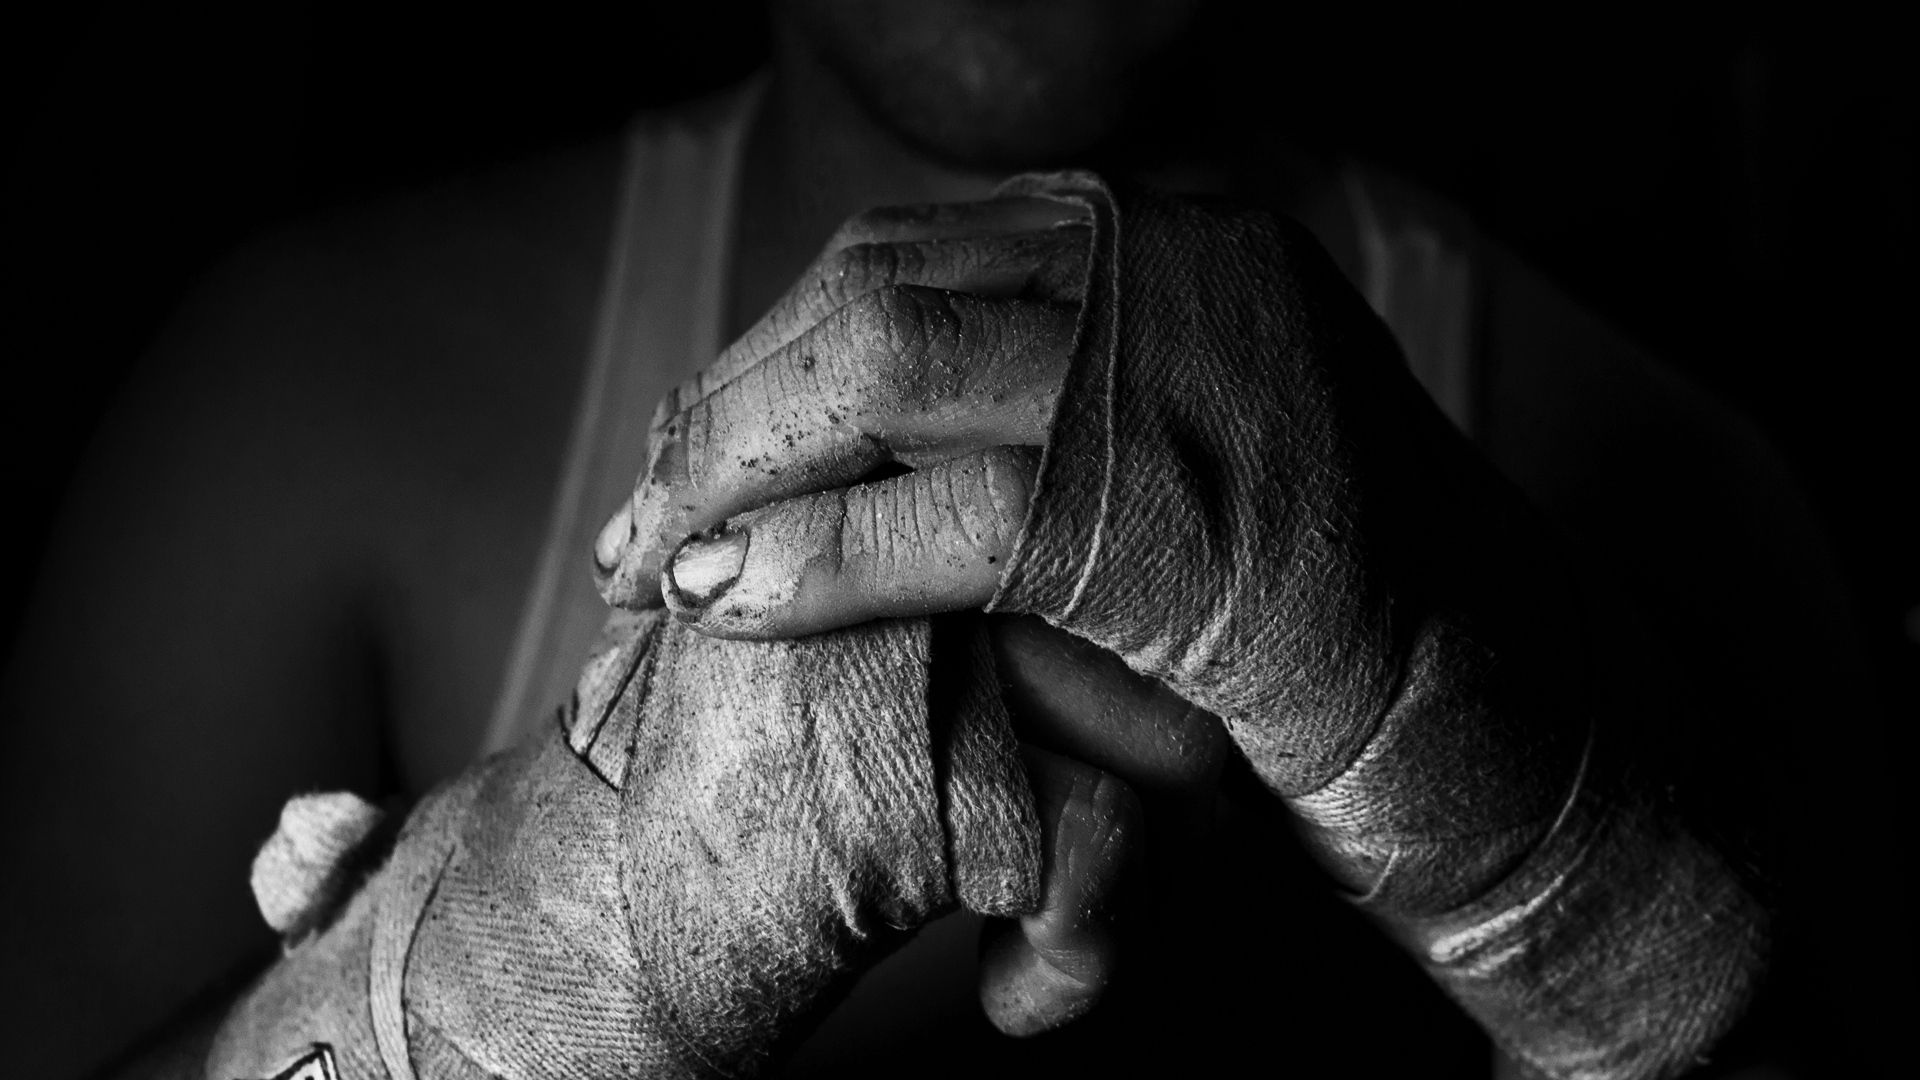 chb, sports, hands, bw, fighter, bandages wallpapers for tablet